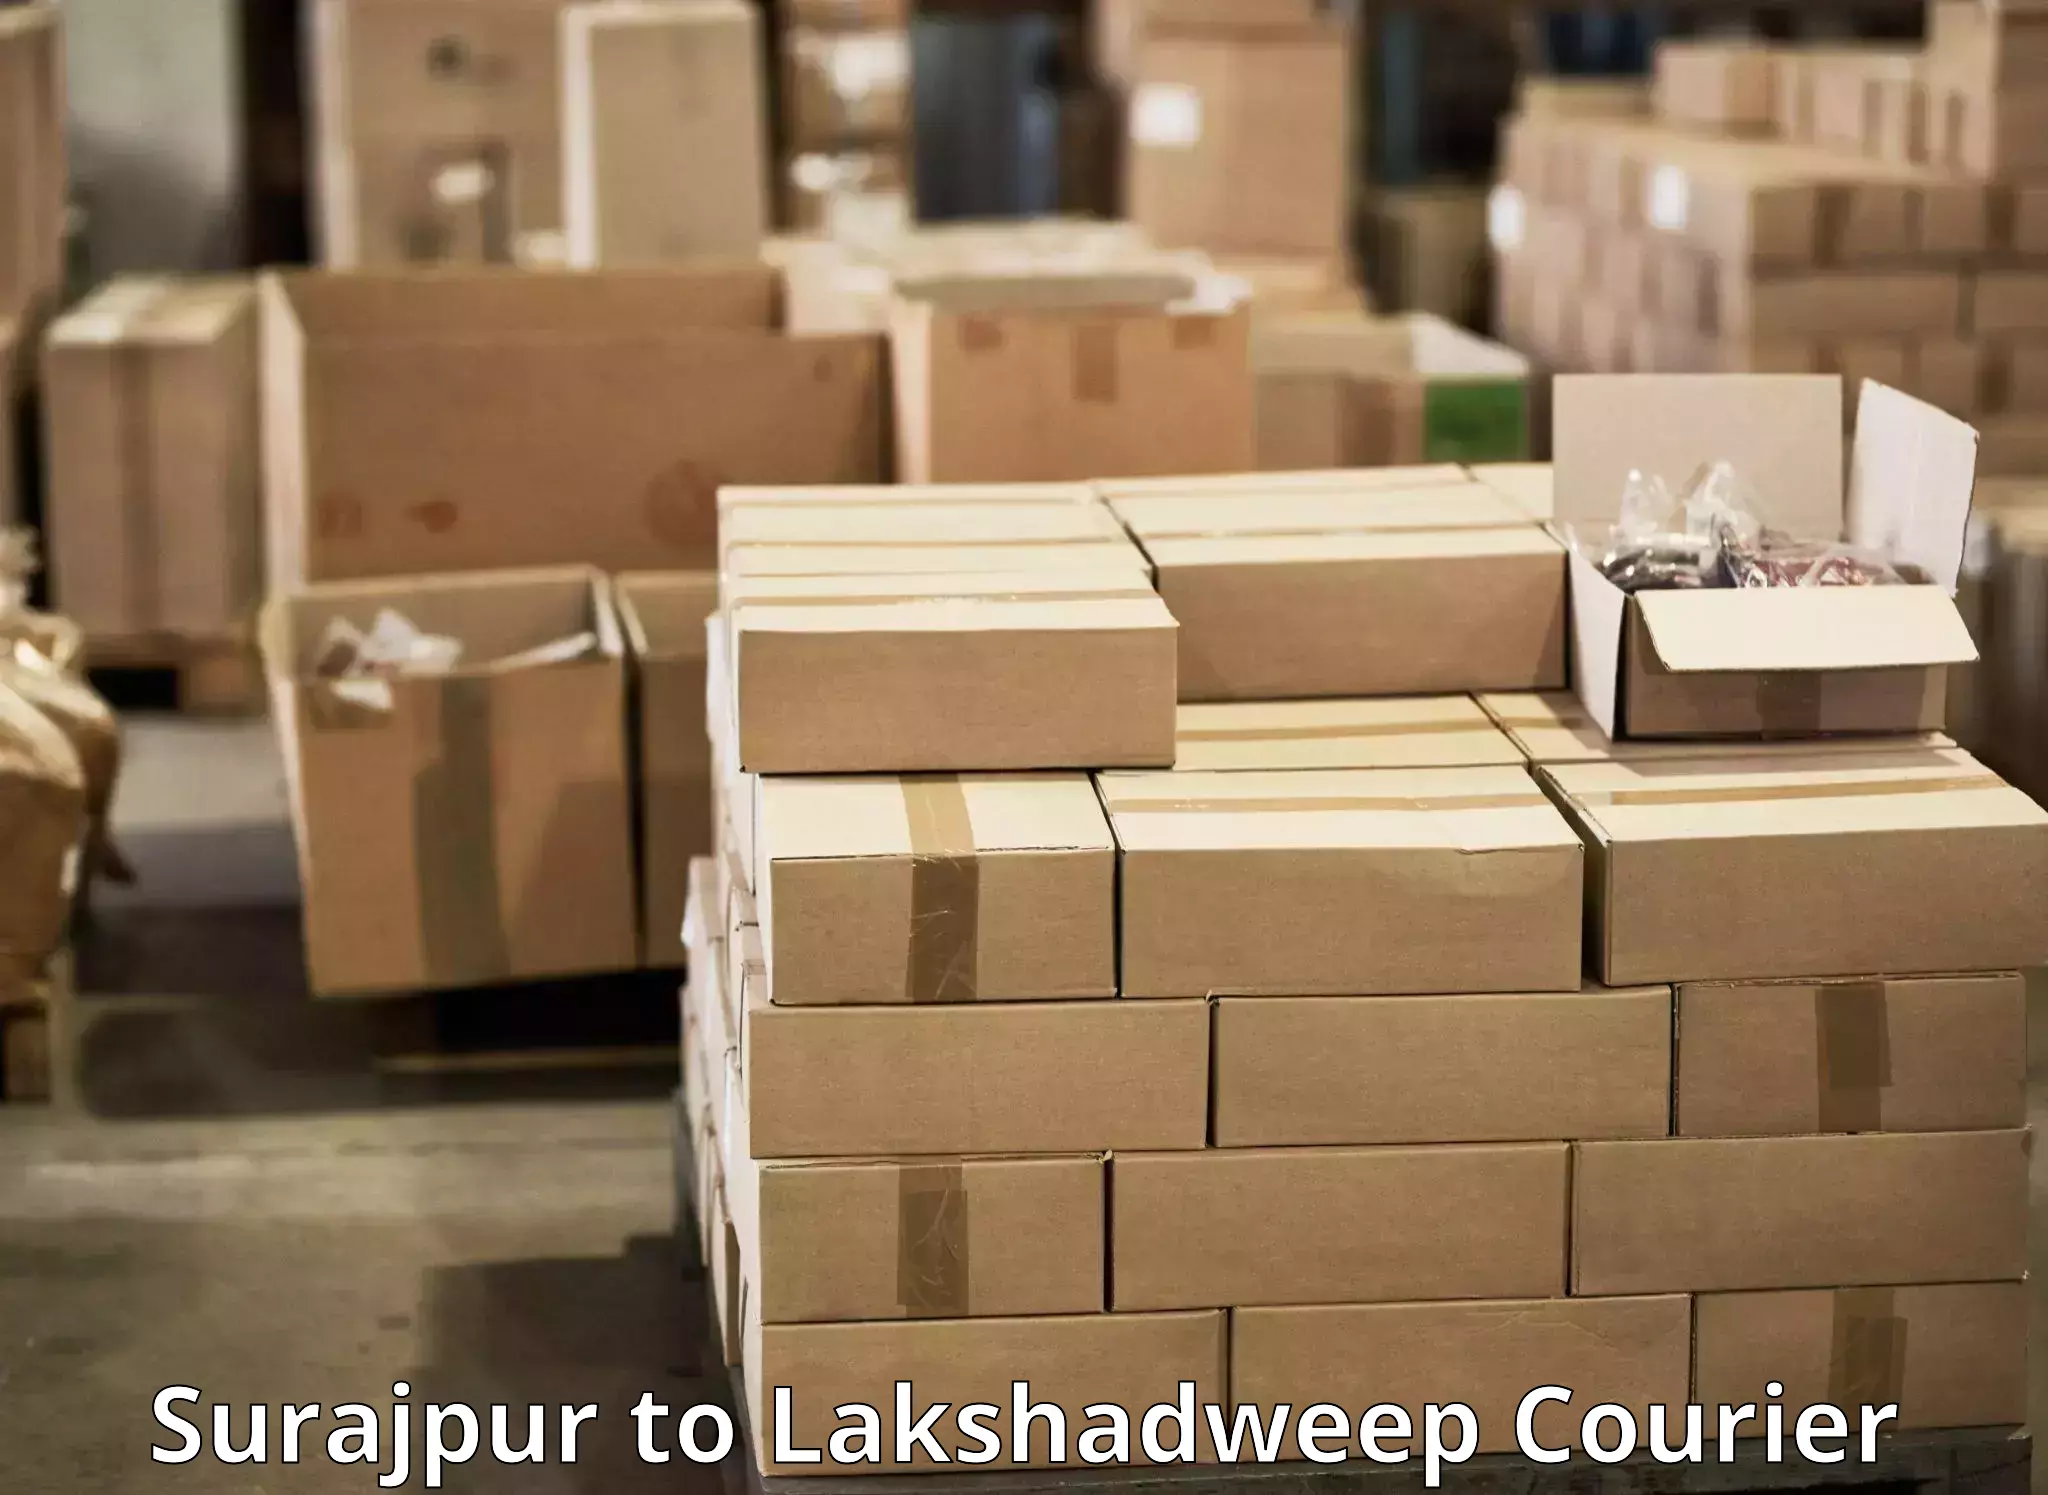 Courier tracking online Surajpur to Lakshadweep